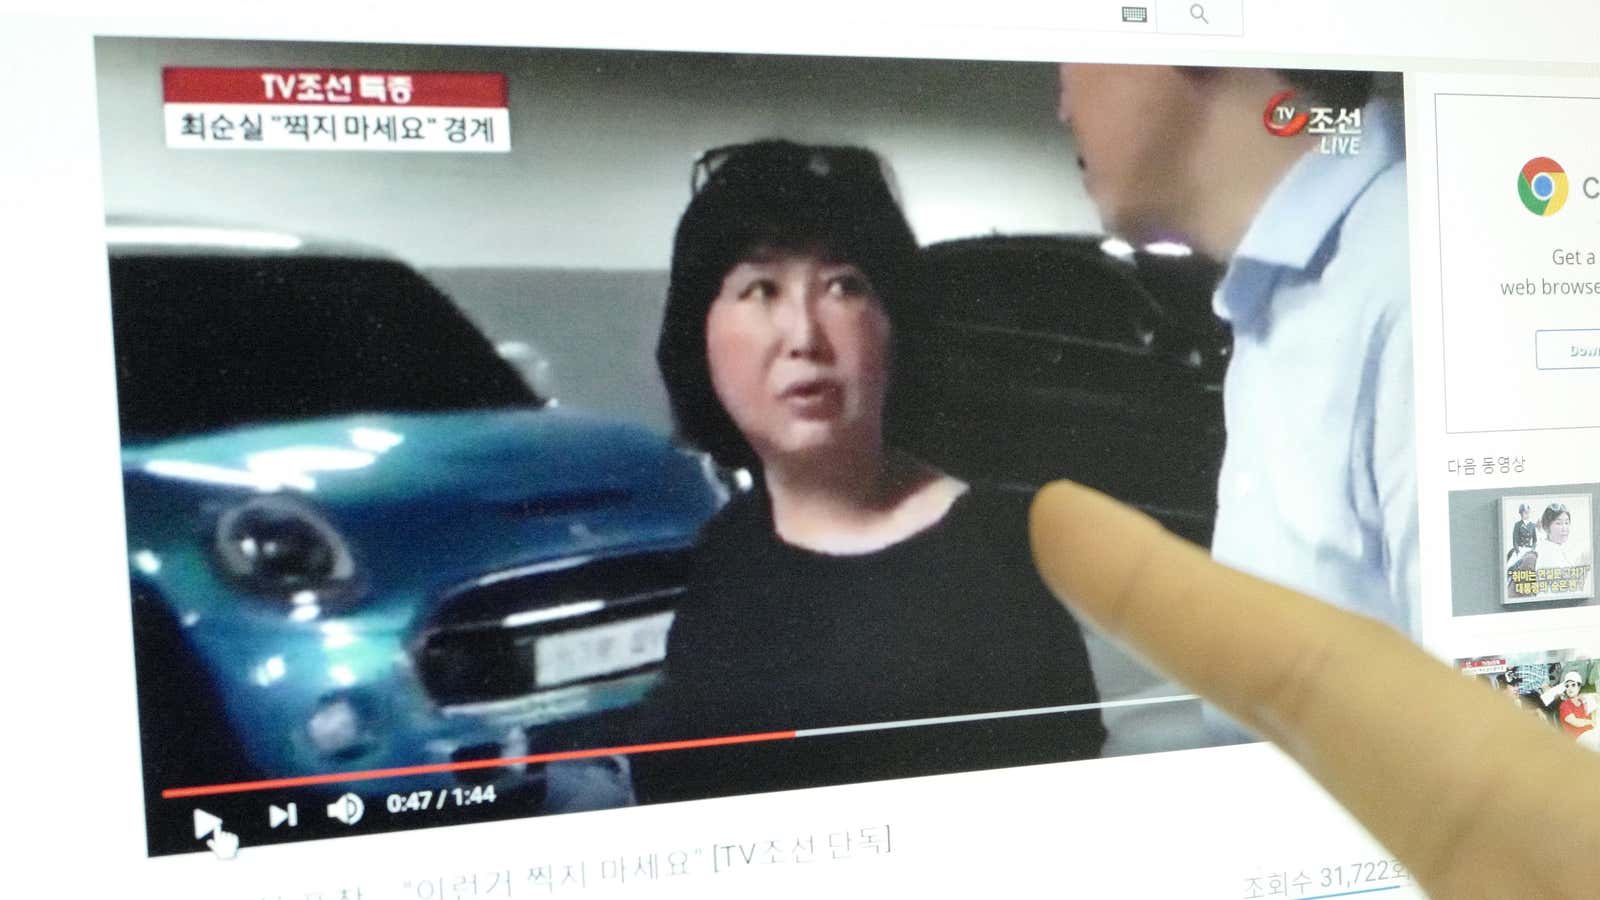 A person points at Choi Sun-sil shown during an online news report in Seoul, South Korea, 26 October 2016.